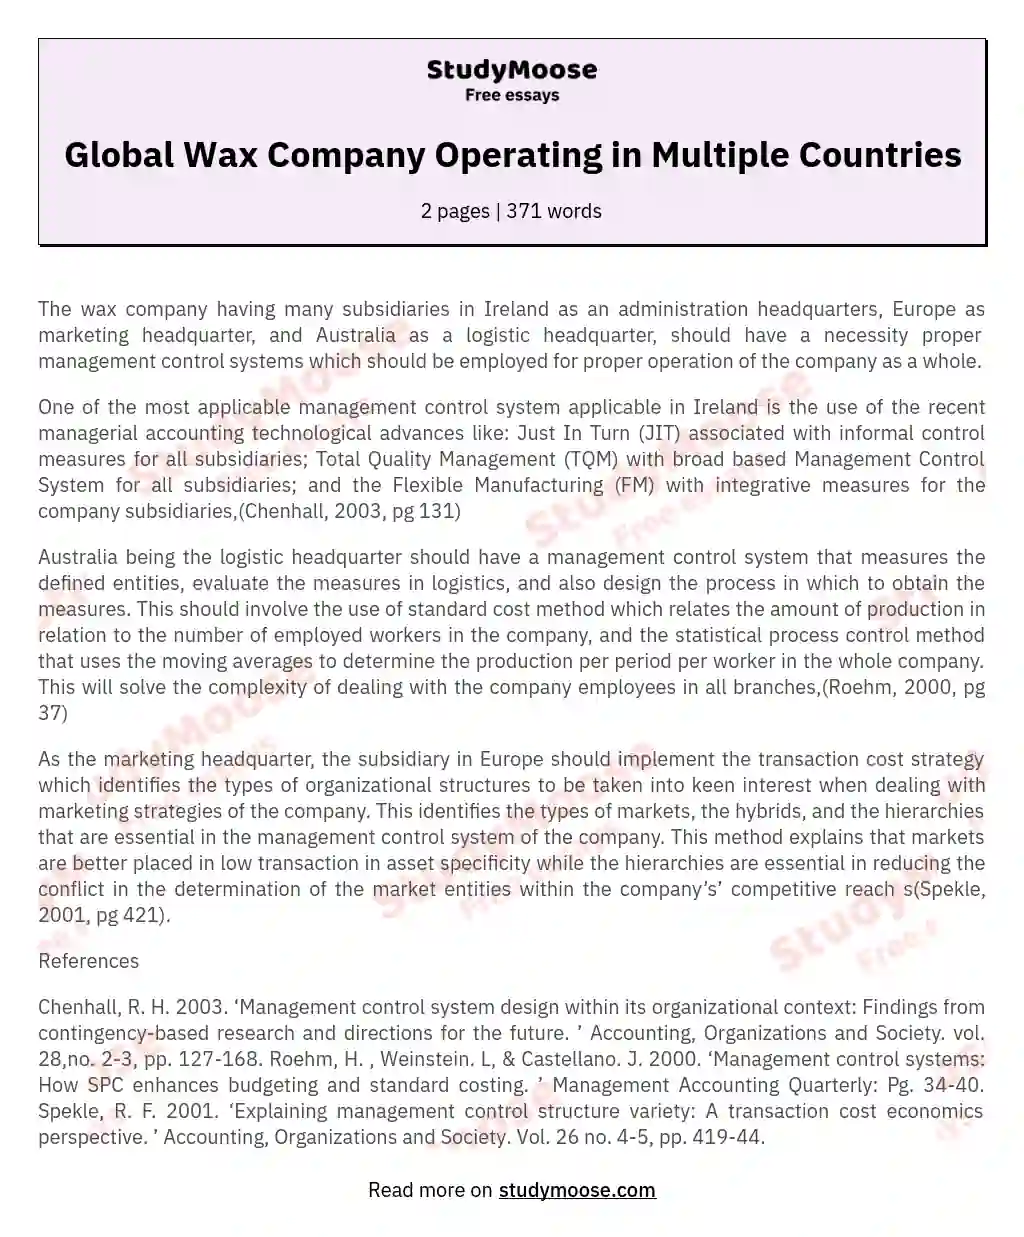 Global Wax Company Operating in Multiple Countries essay